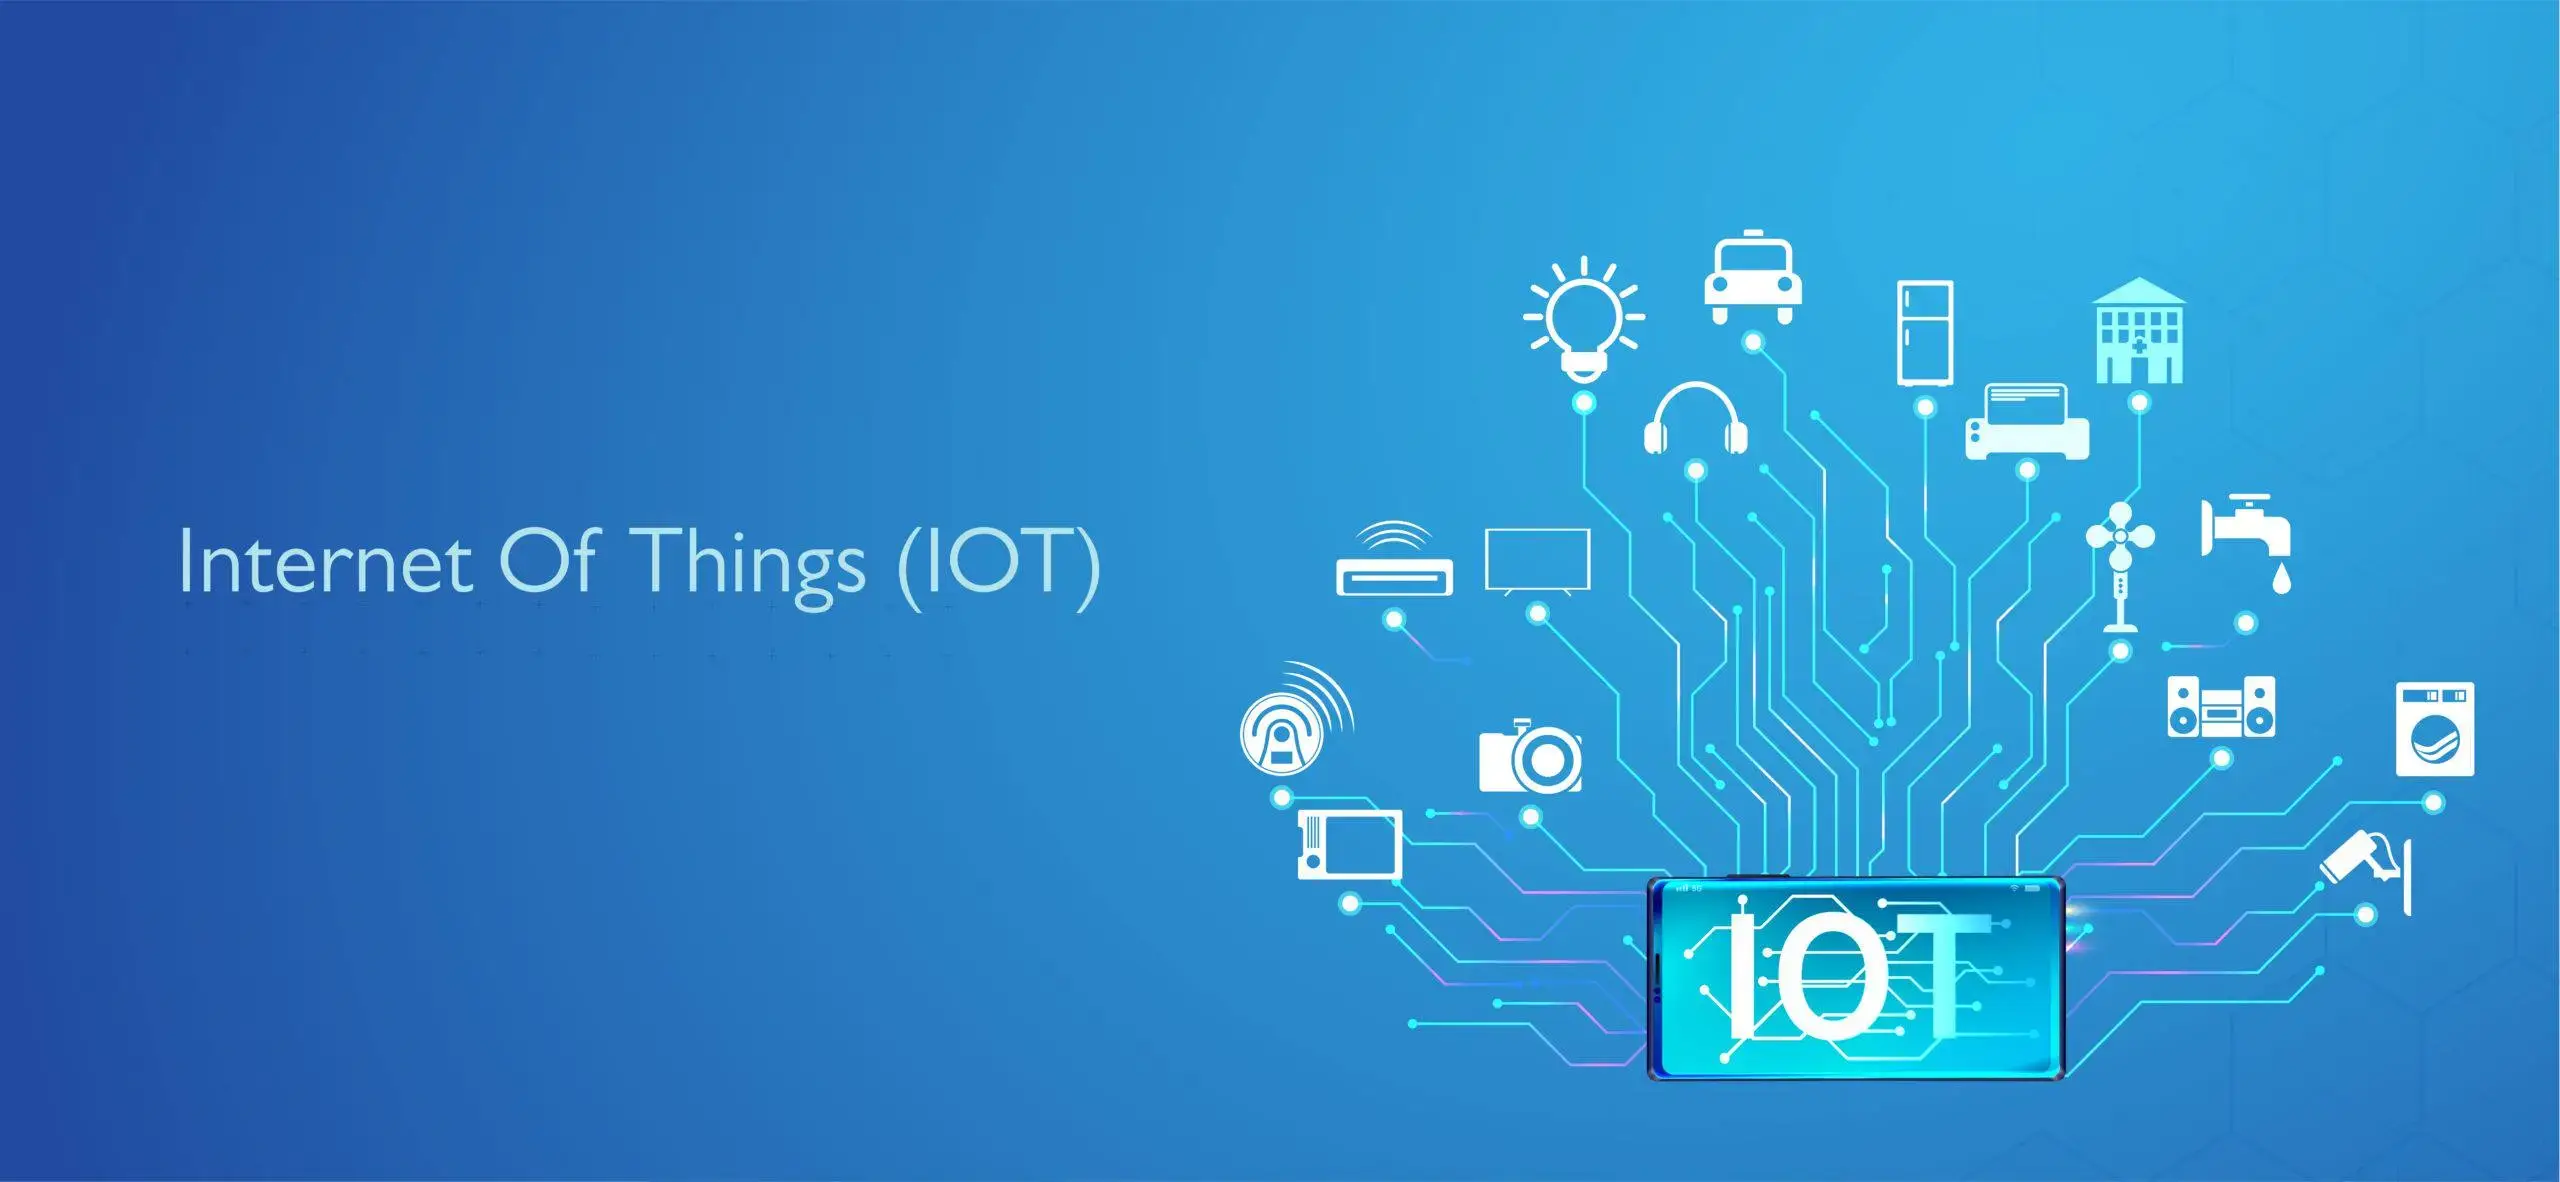 A Quick Start Guide to Internet of Things (IoT)